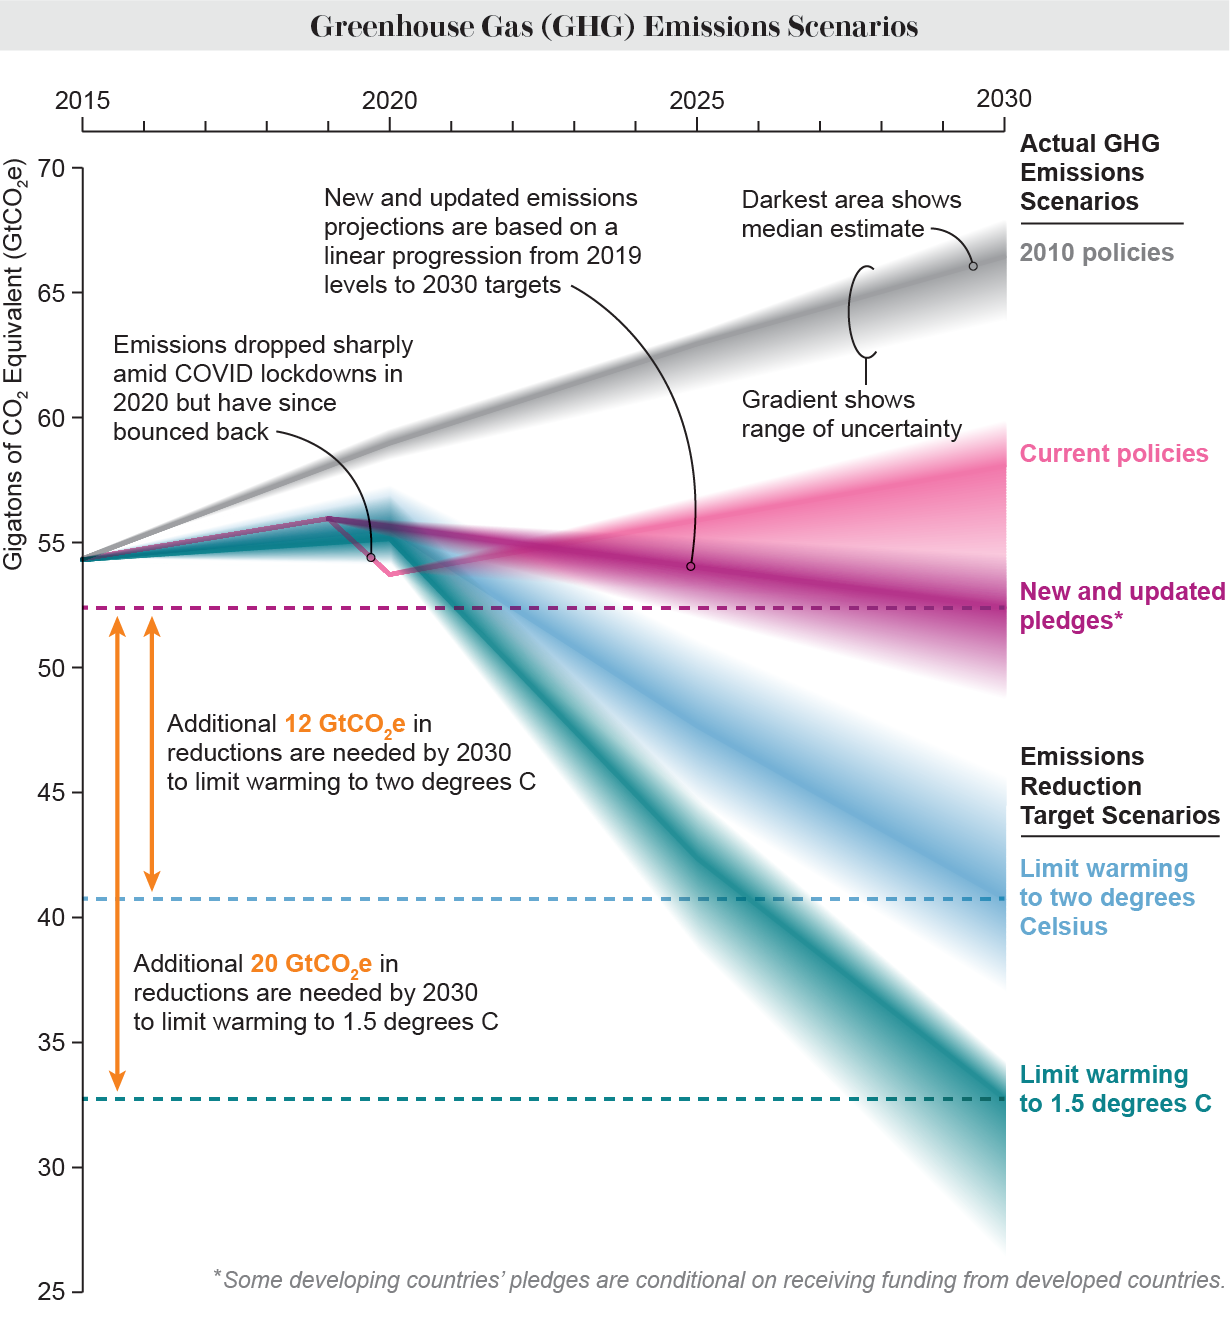 Chart shows various global emission scenarios and additional reductions needed to stay within target warming ranges.